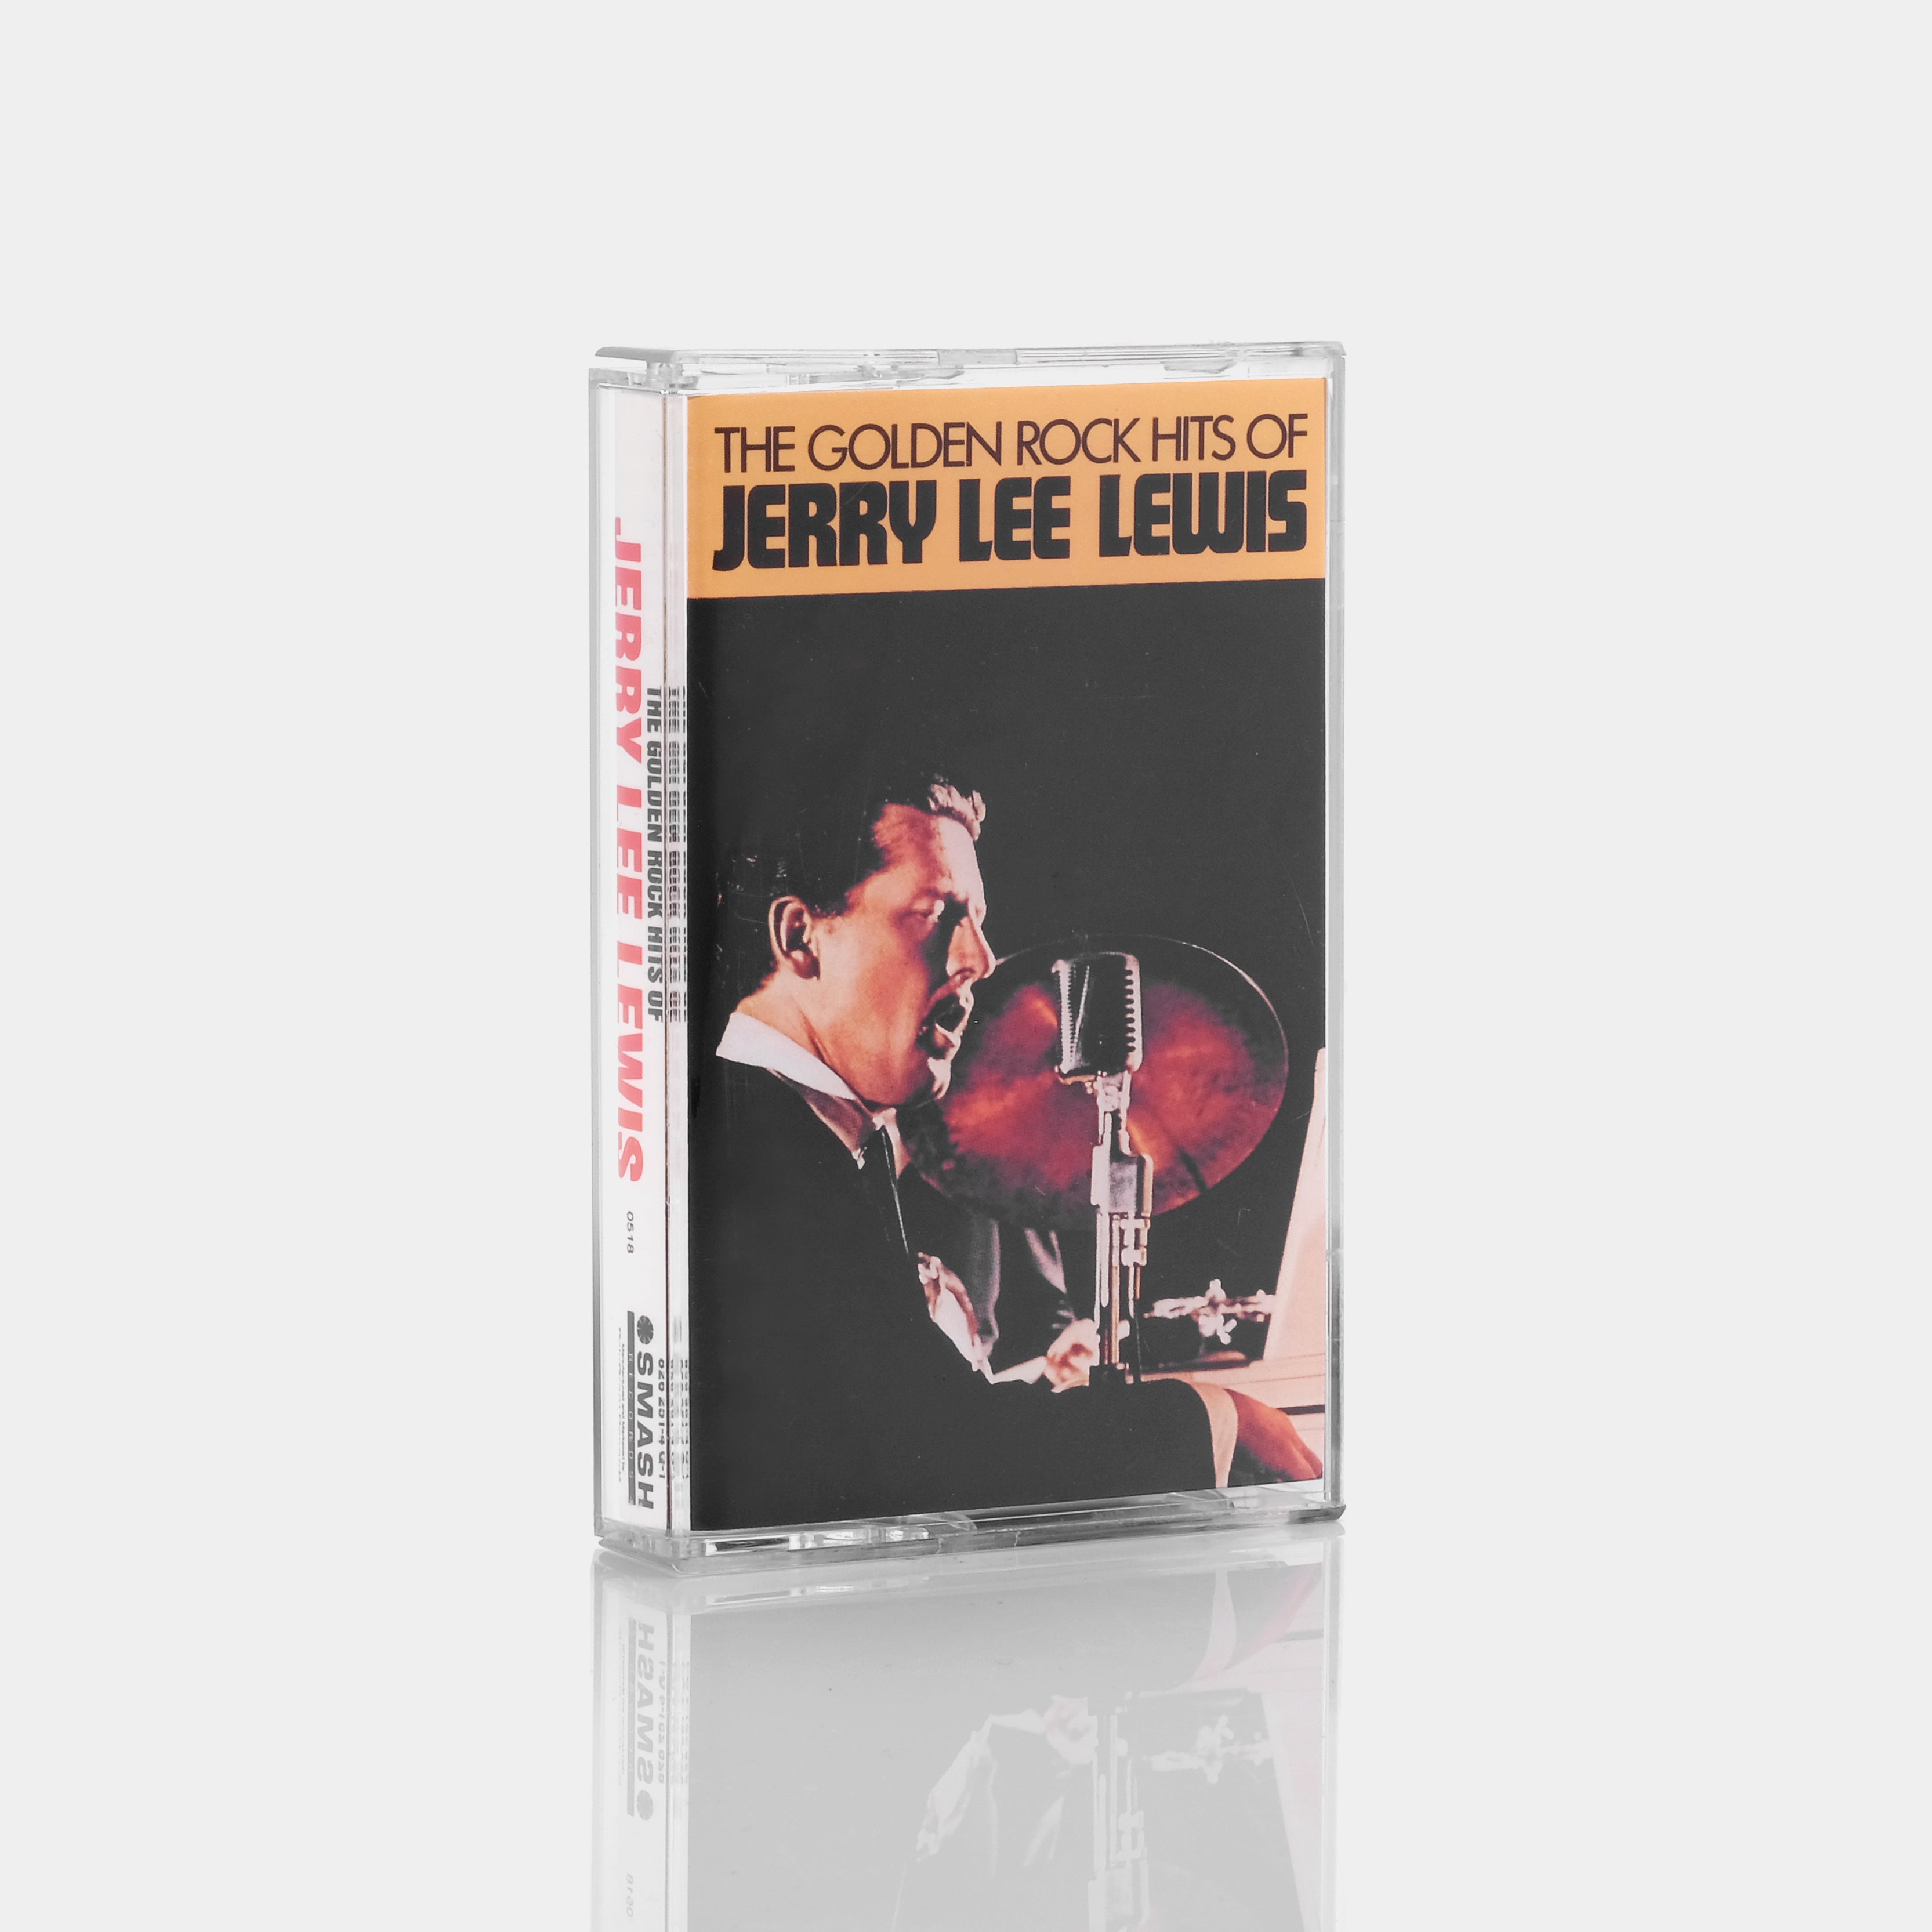 Jerry Lee Lewis - The Golden Rock Hits of Jerry Lee Lewis Cassette Tape